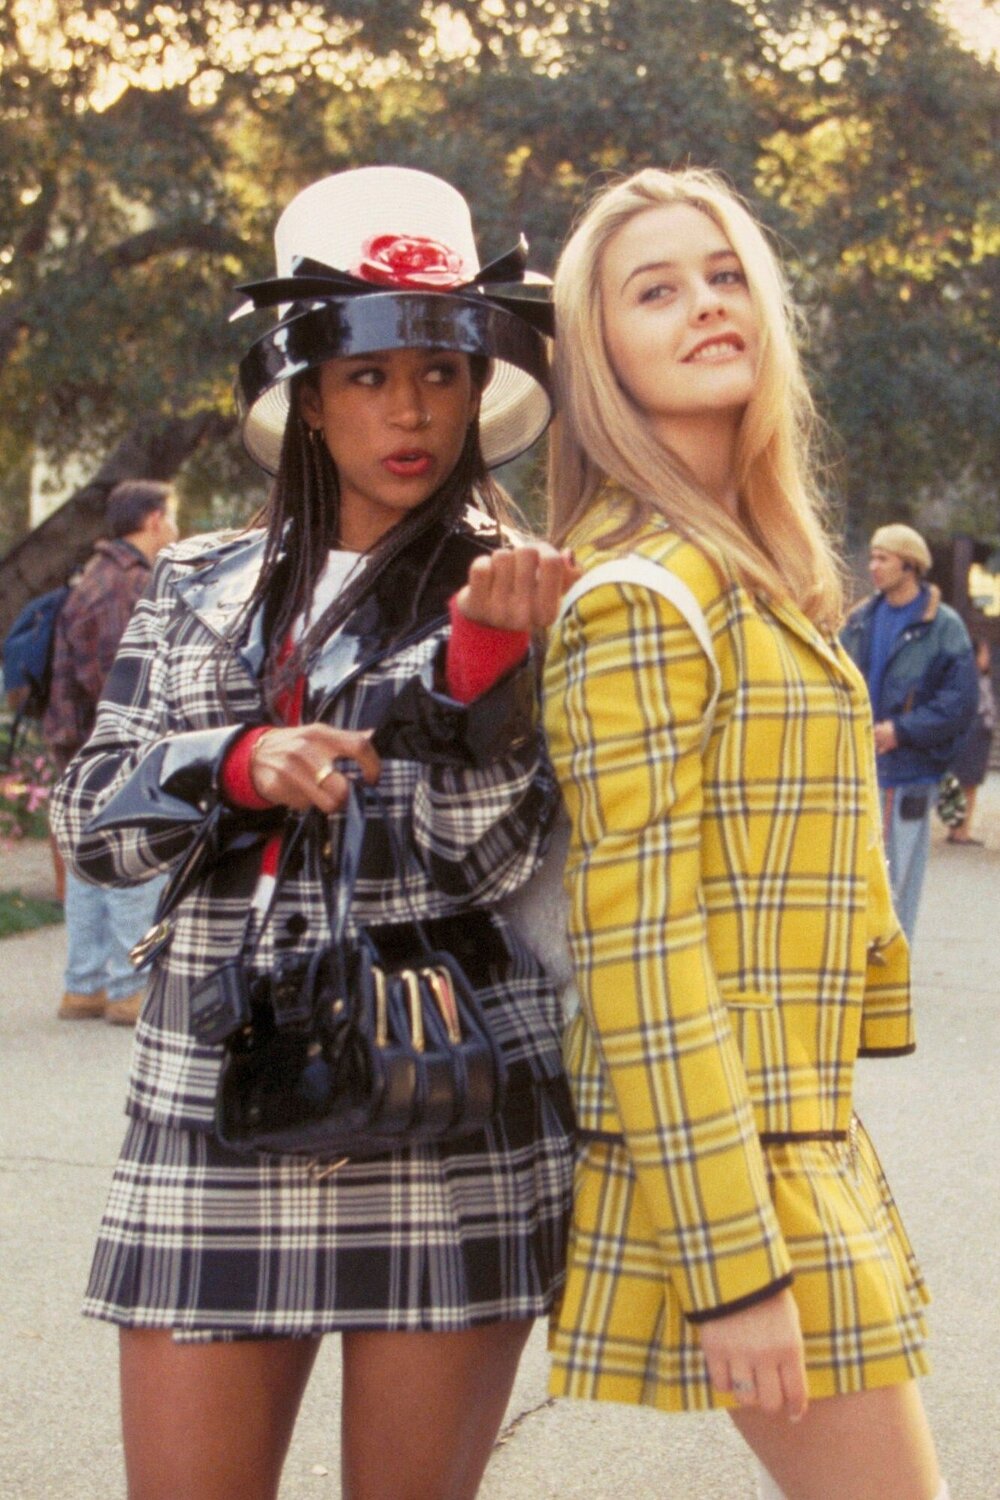 Cher and Dionne's matching plaid outfits